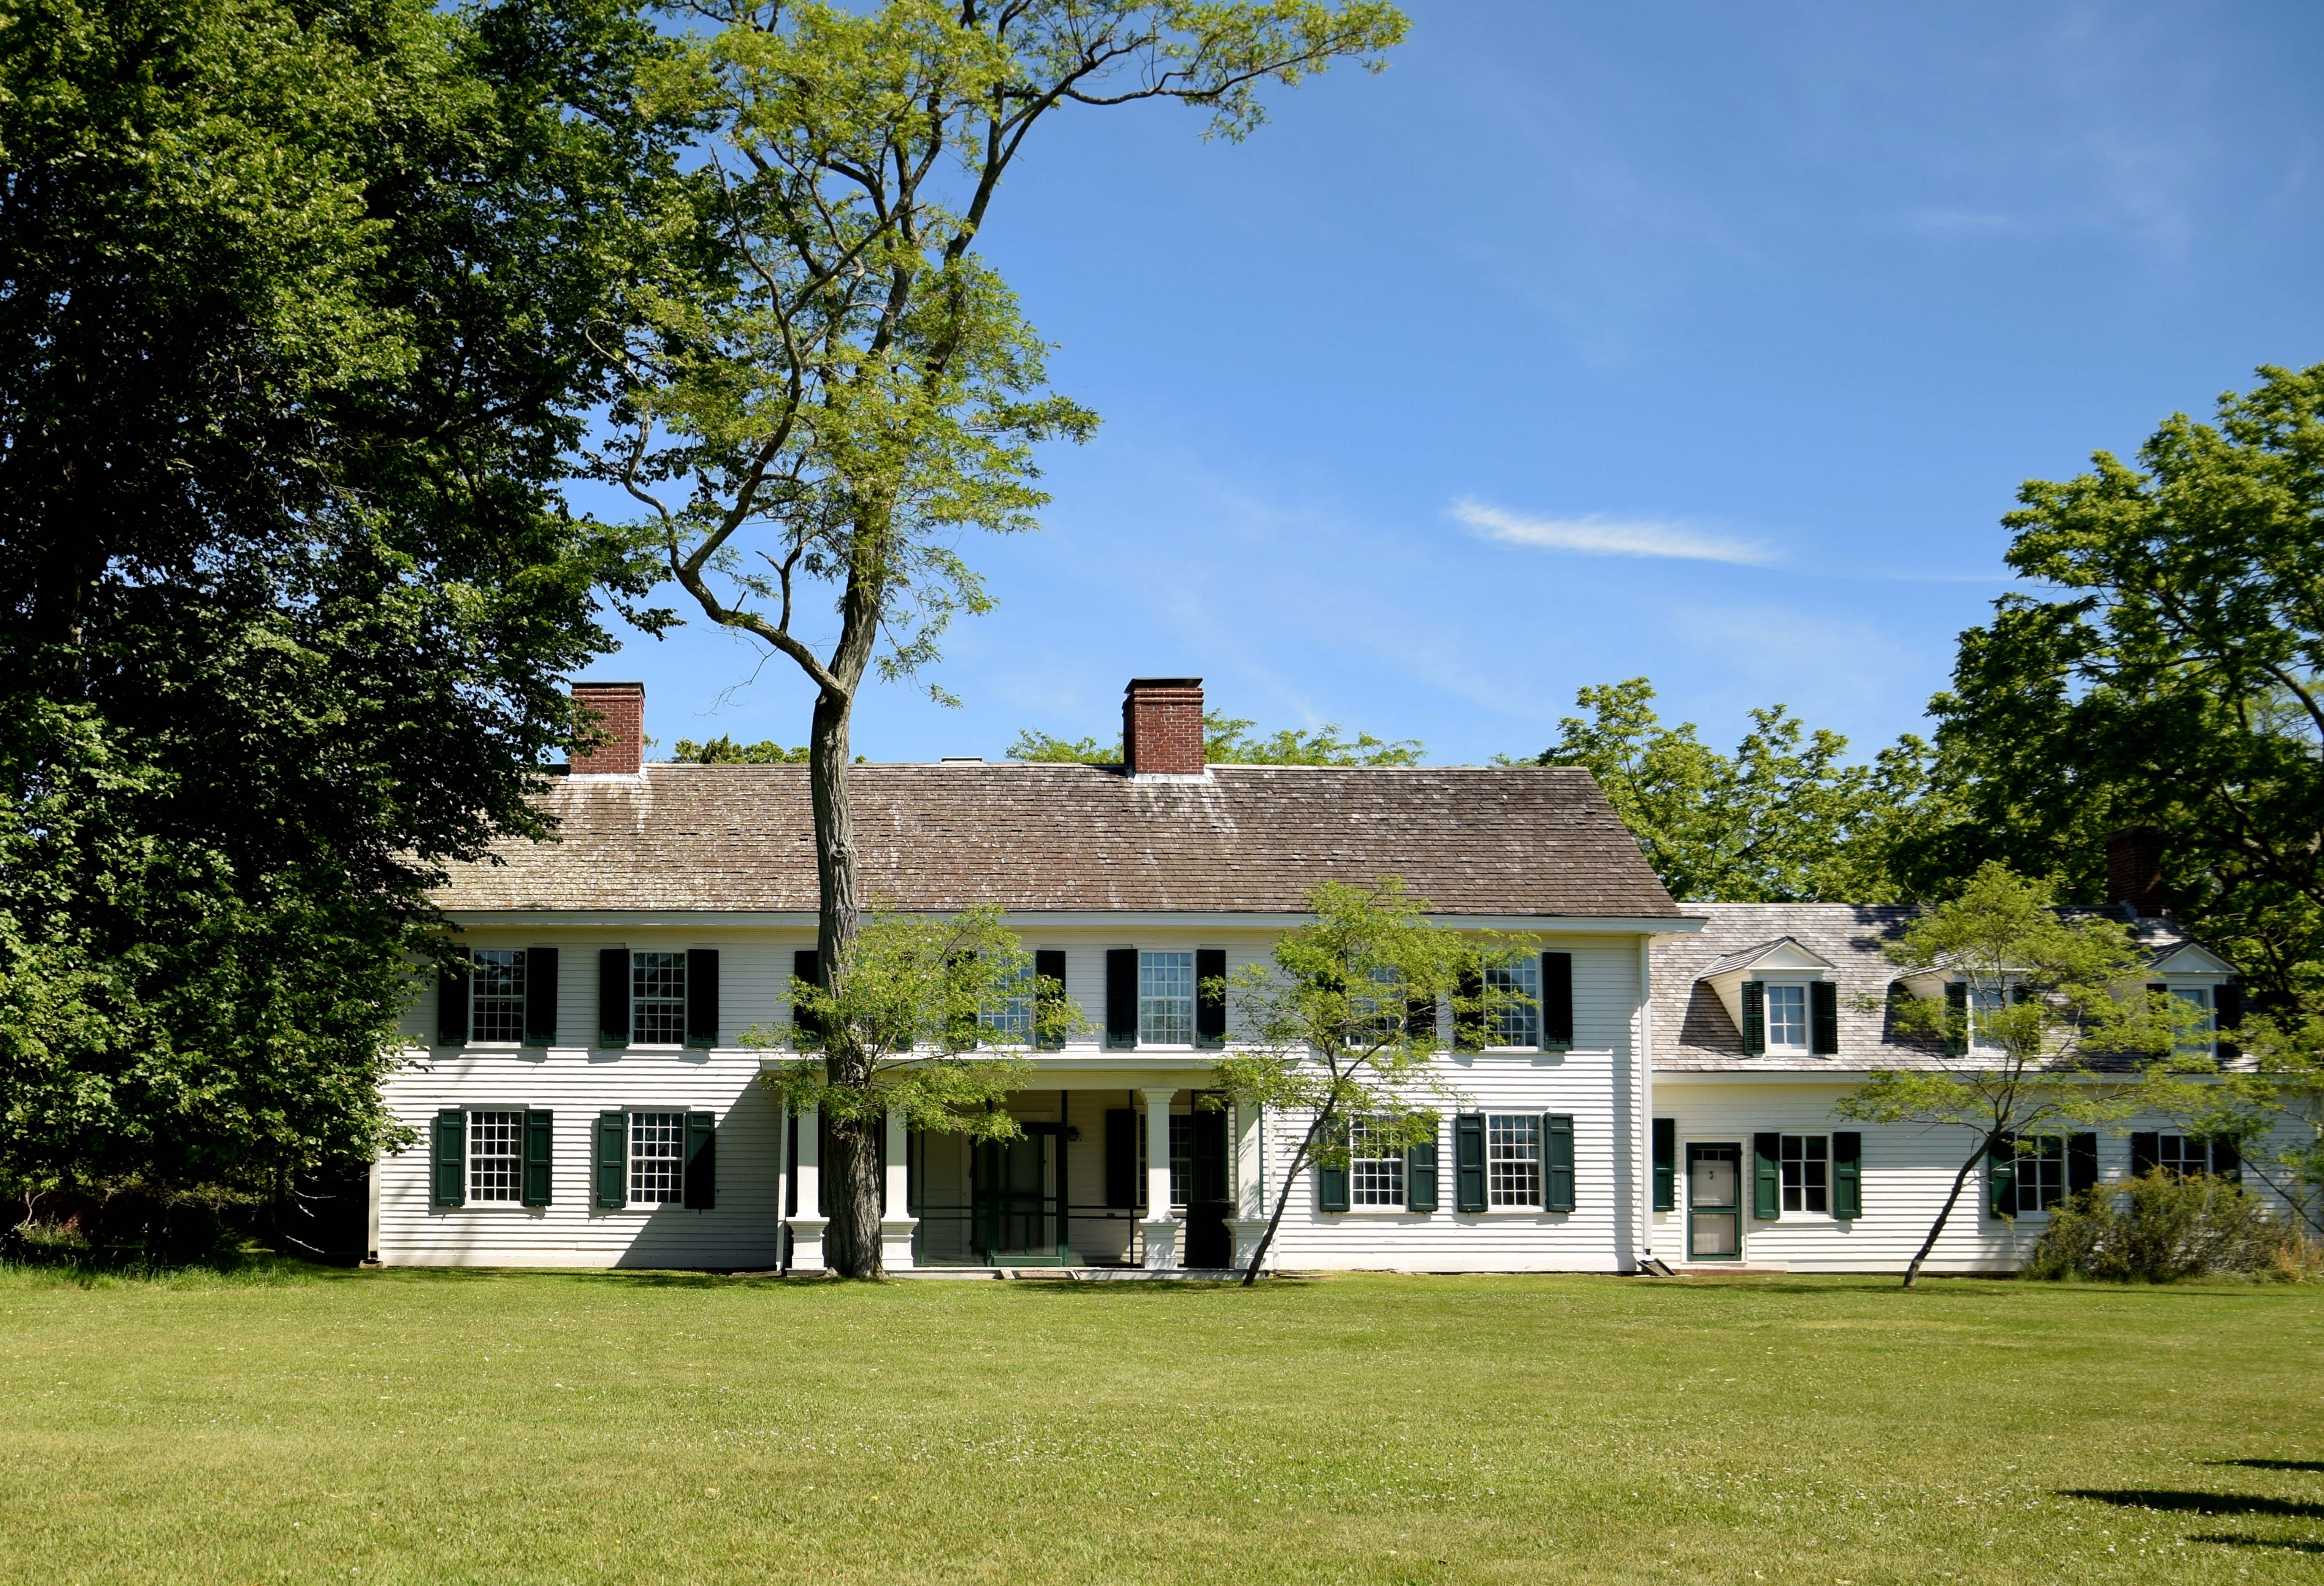 A large white historic home surrounded by lush green lawn and trees